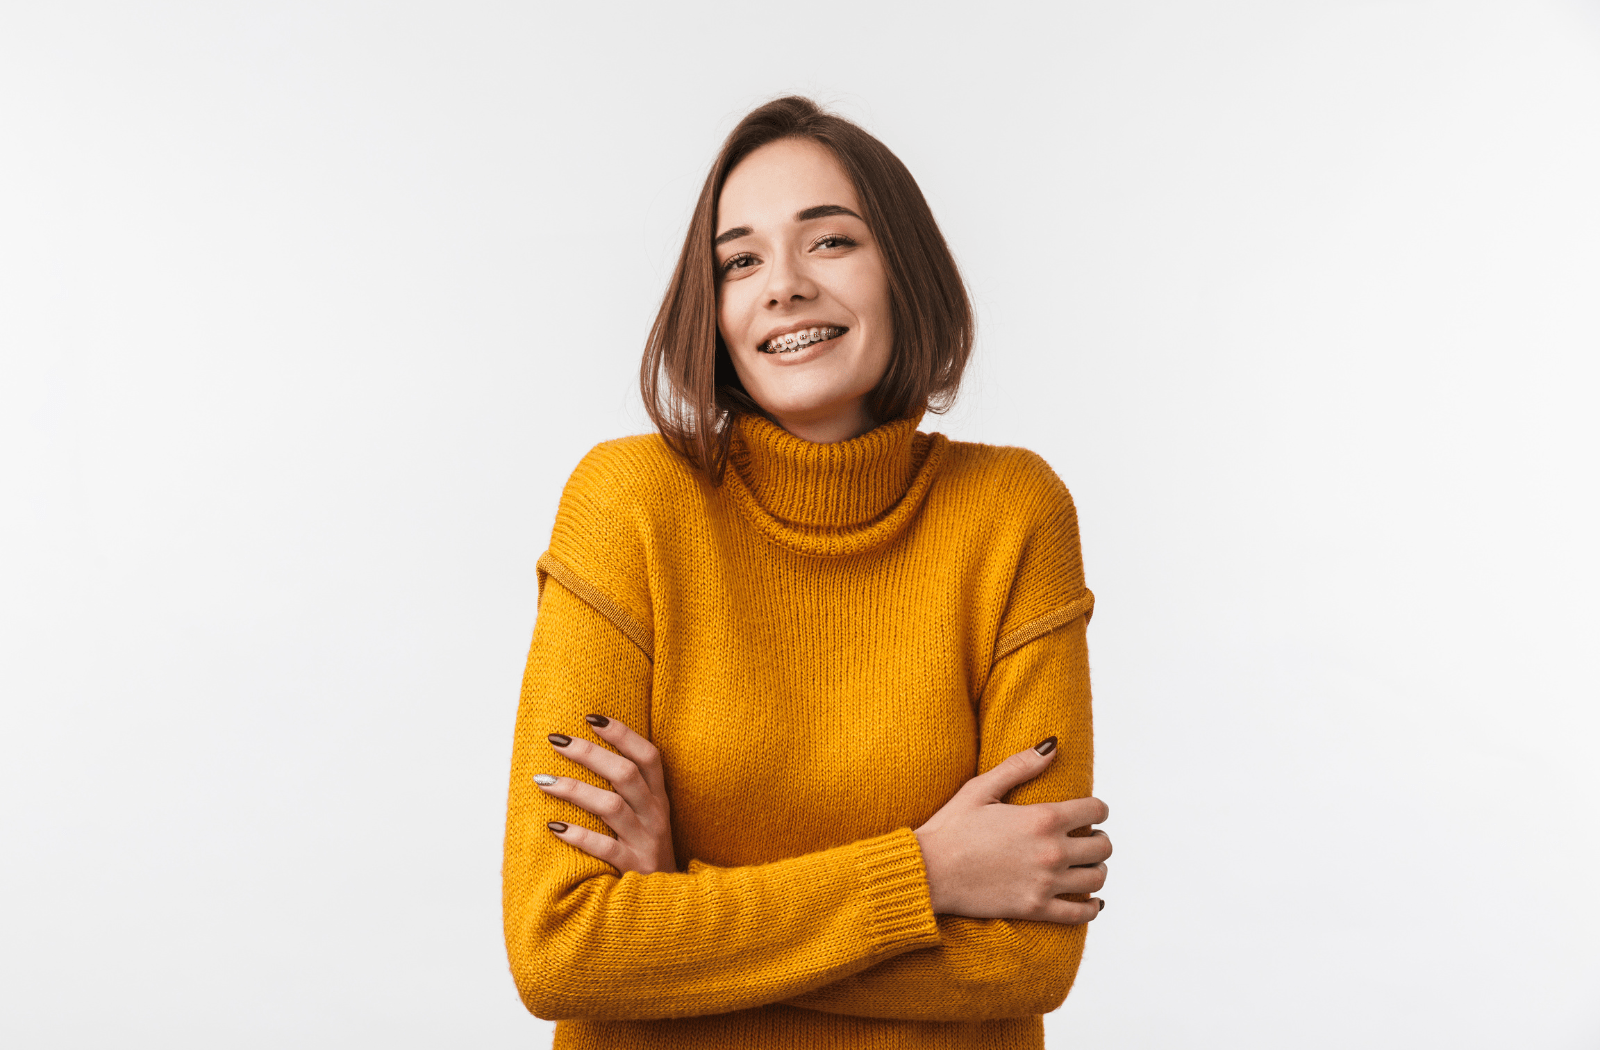 A young adult woman smiling with her braces showing, wearing a yellow sweater